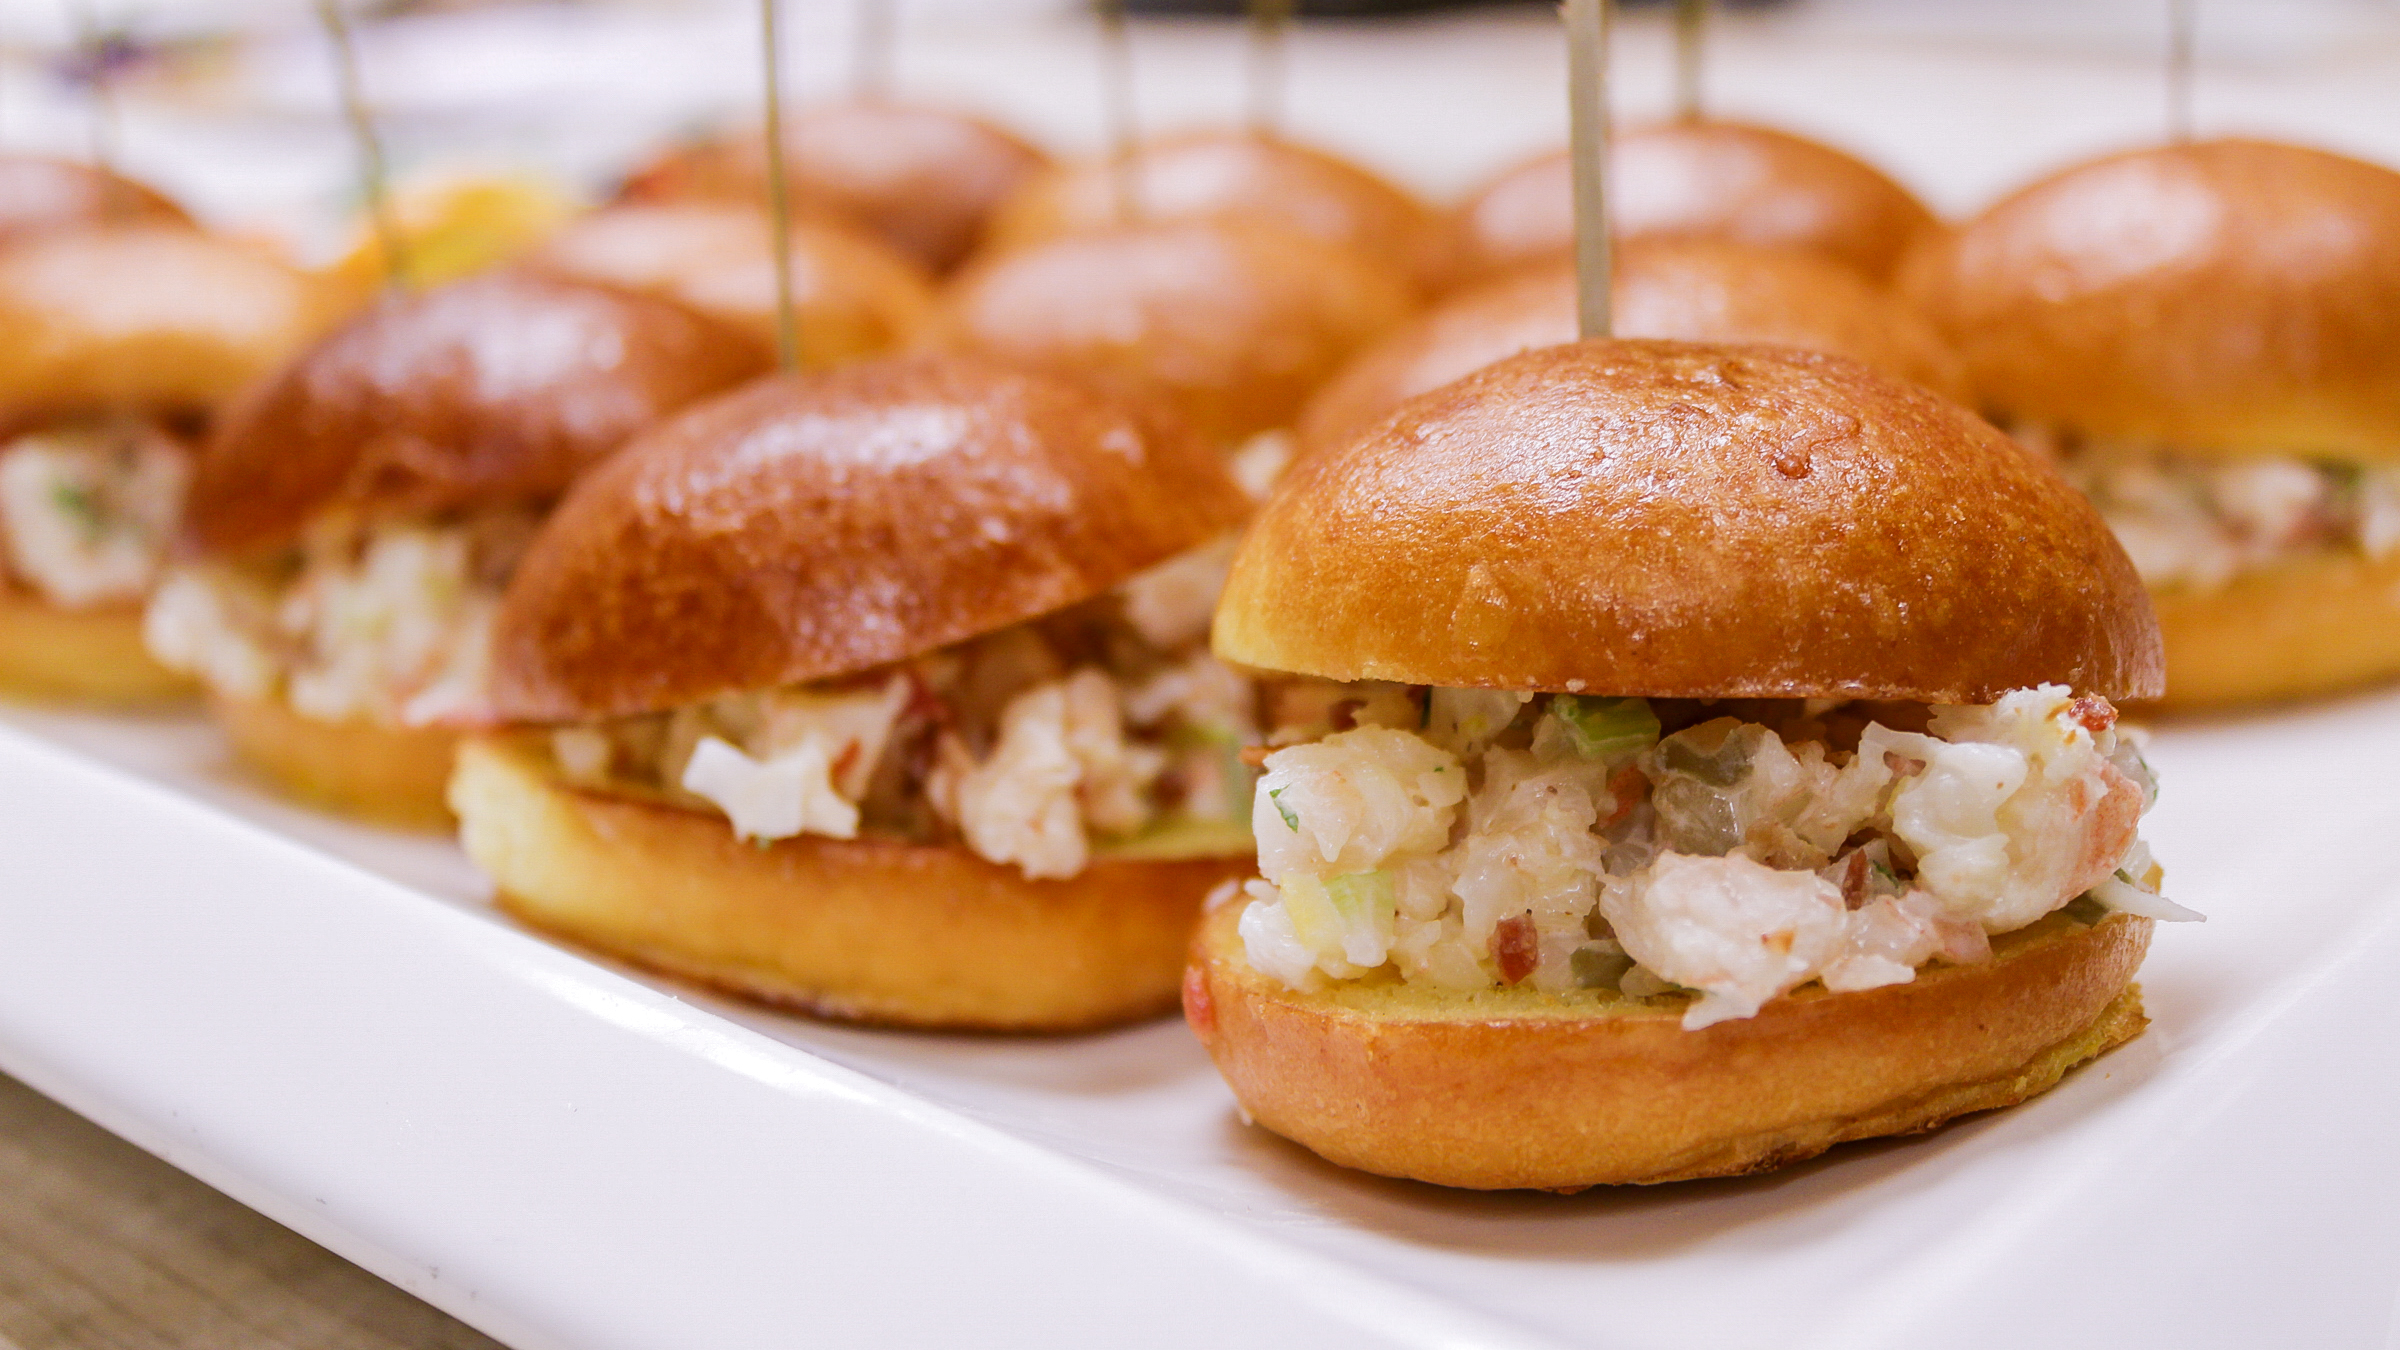 Delicious lobster sliders will excite your guests at your next special event.